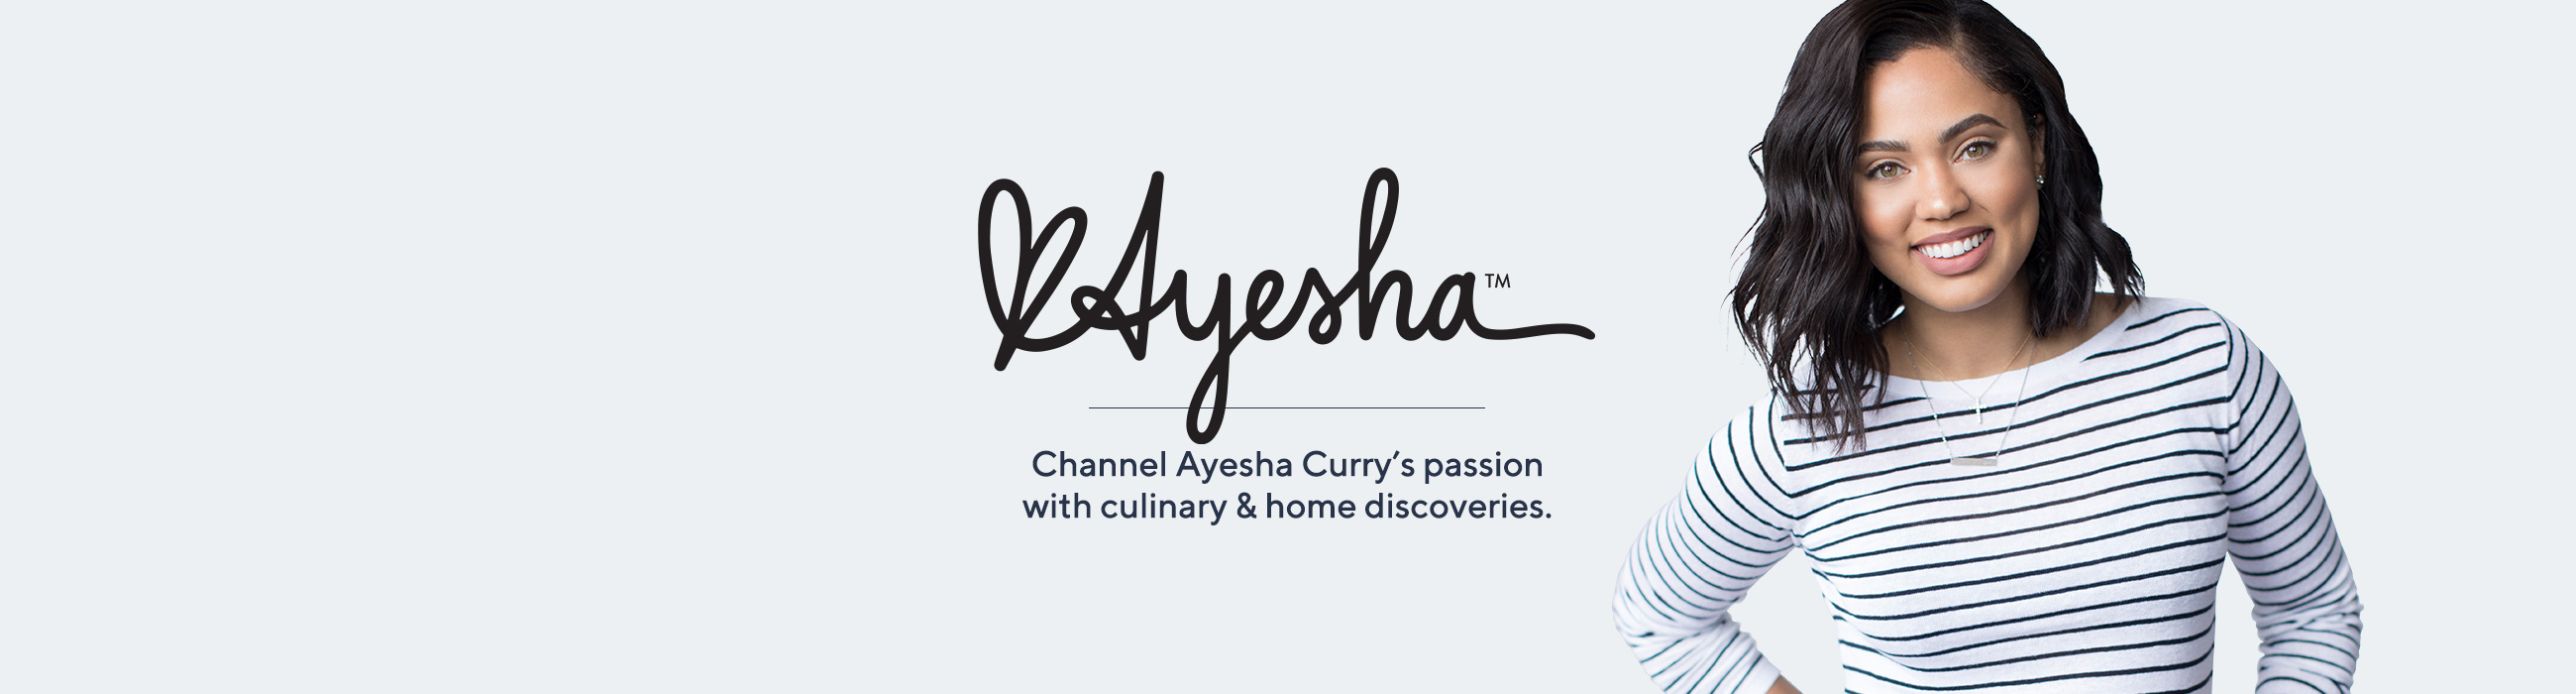 Channel Ayesha Curry's passion with culinary & home discoveries. 